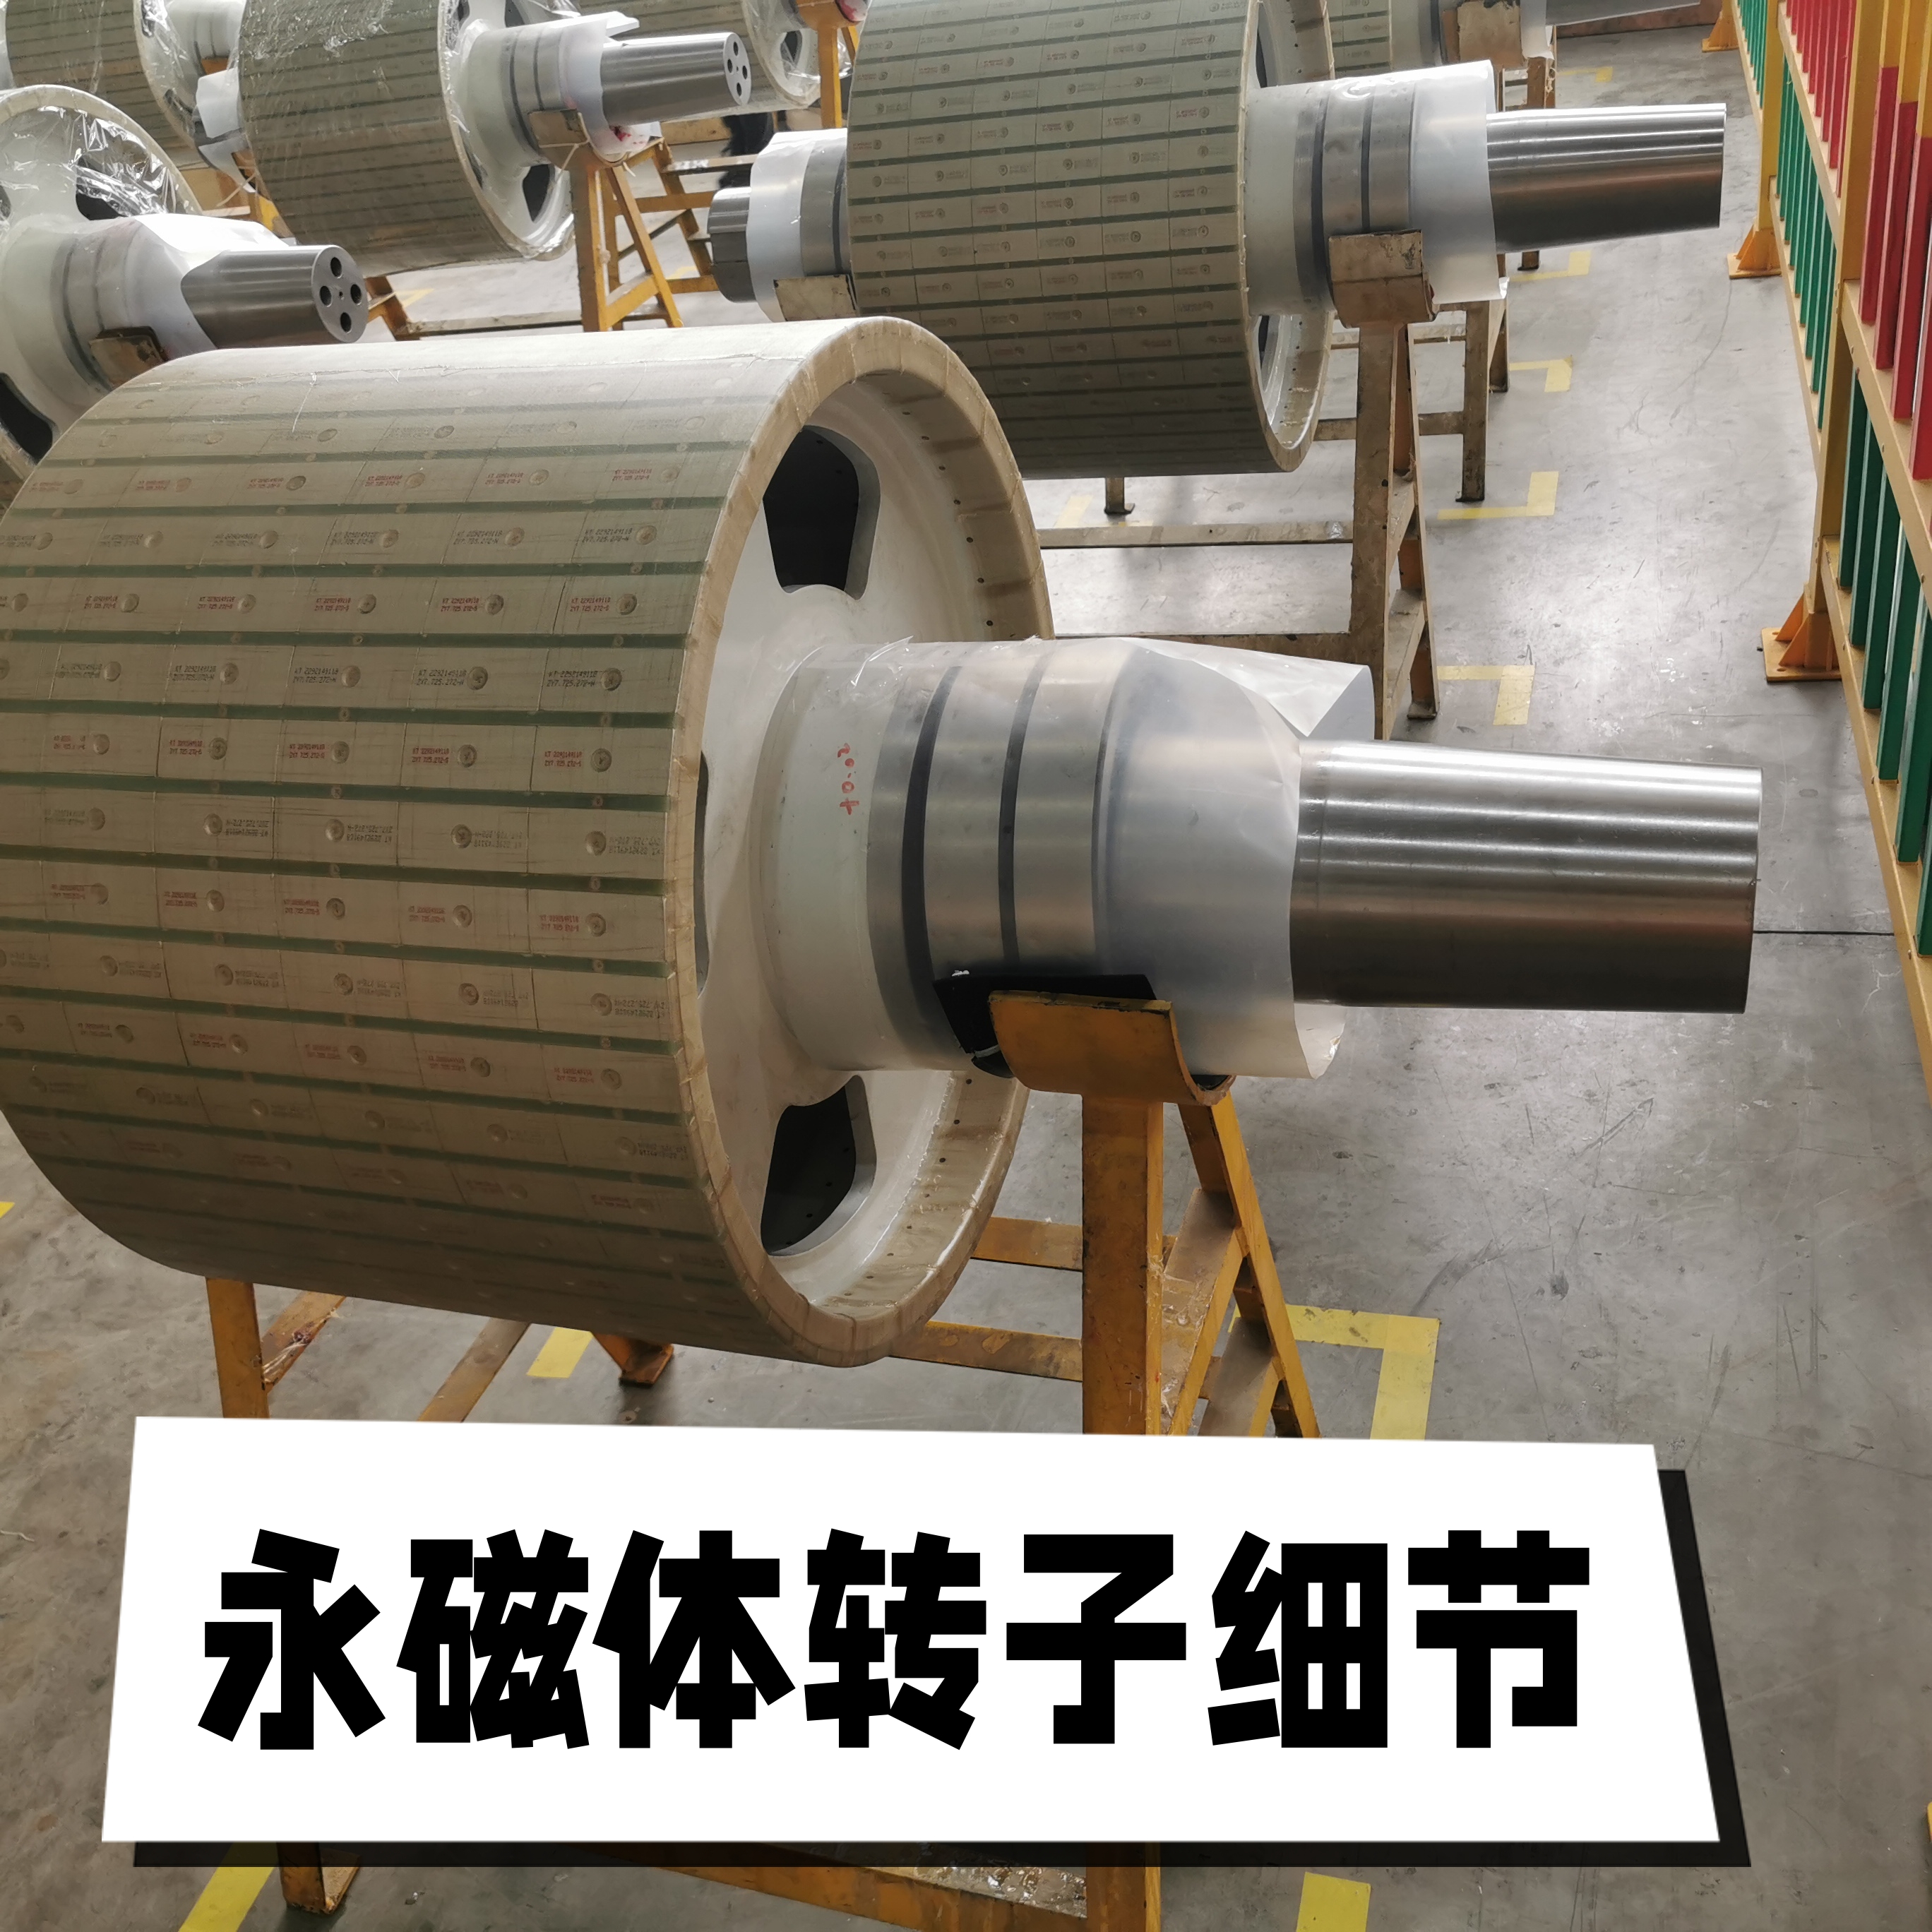 50kw 200 rpm 50Hz maintenance free silent SKF three-phase AC synchronous direct drive hydraulic wind permanent magnet generator